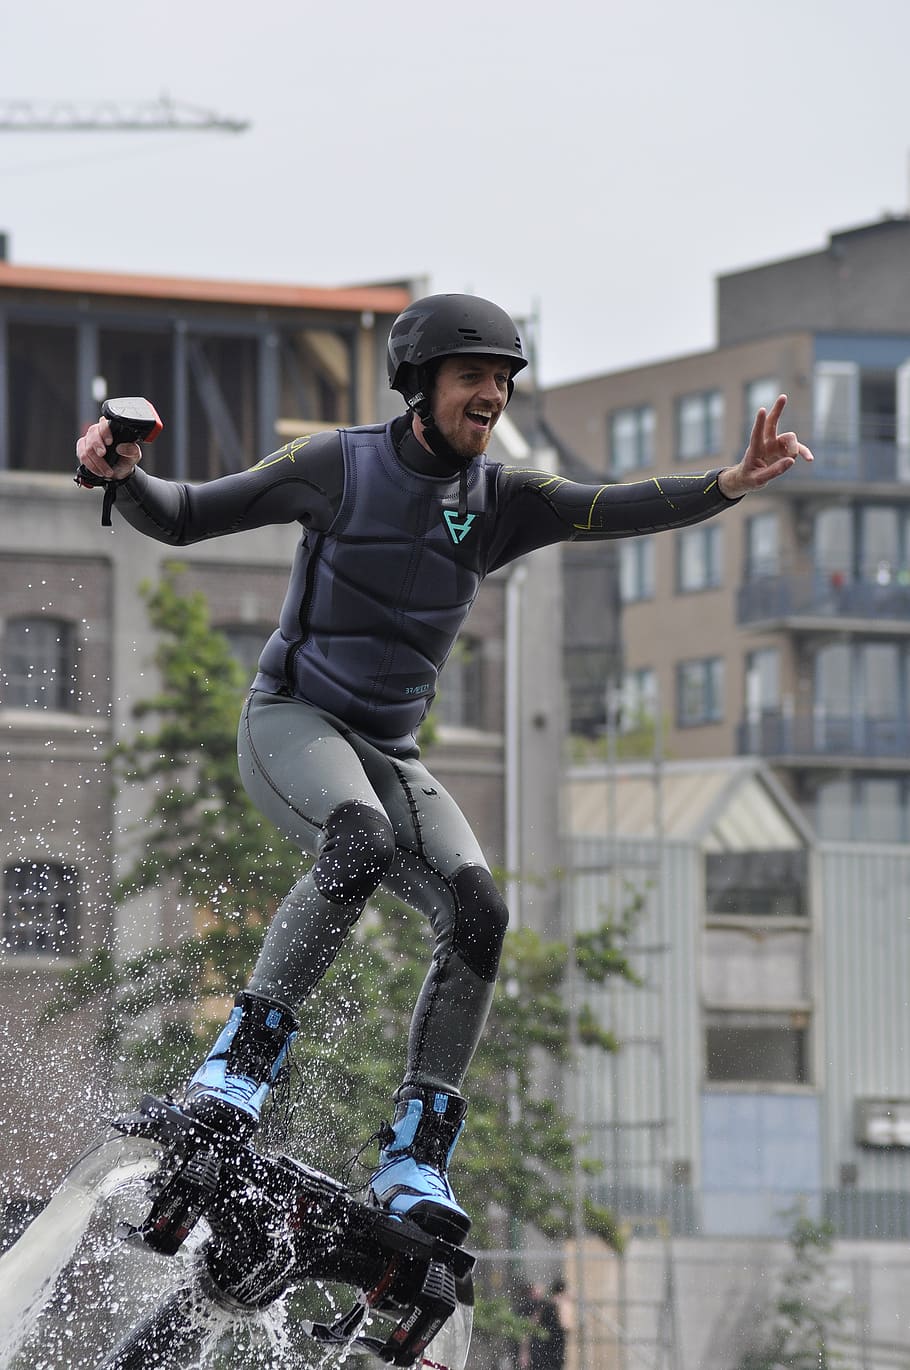 flyboarding, jetboarding, water, extreme sports, activity, action, extreme, one person, building exterior, young adult